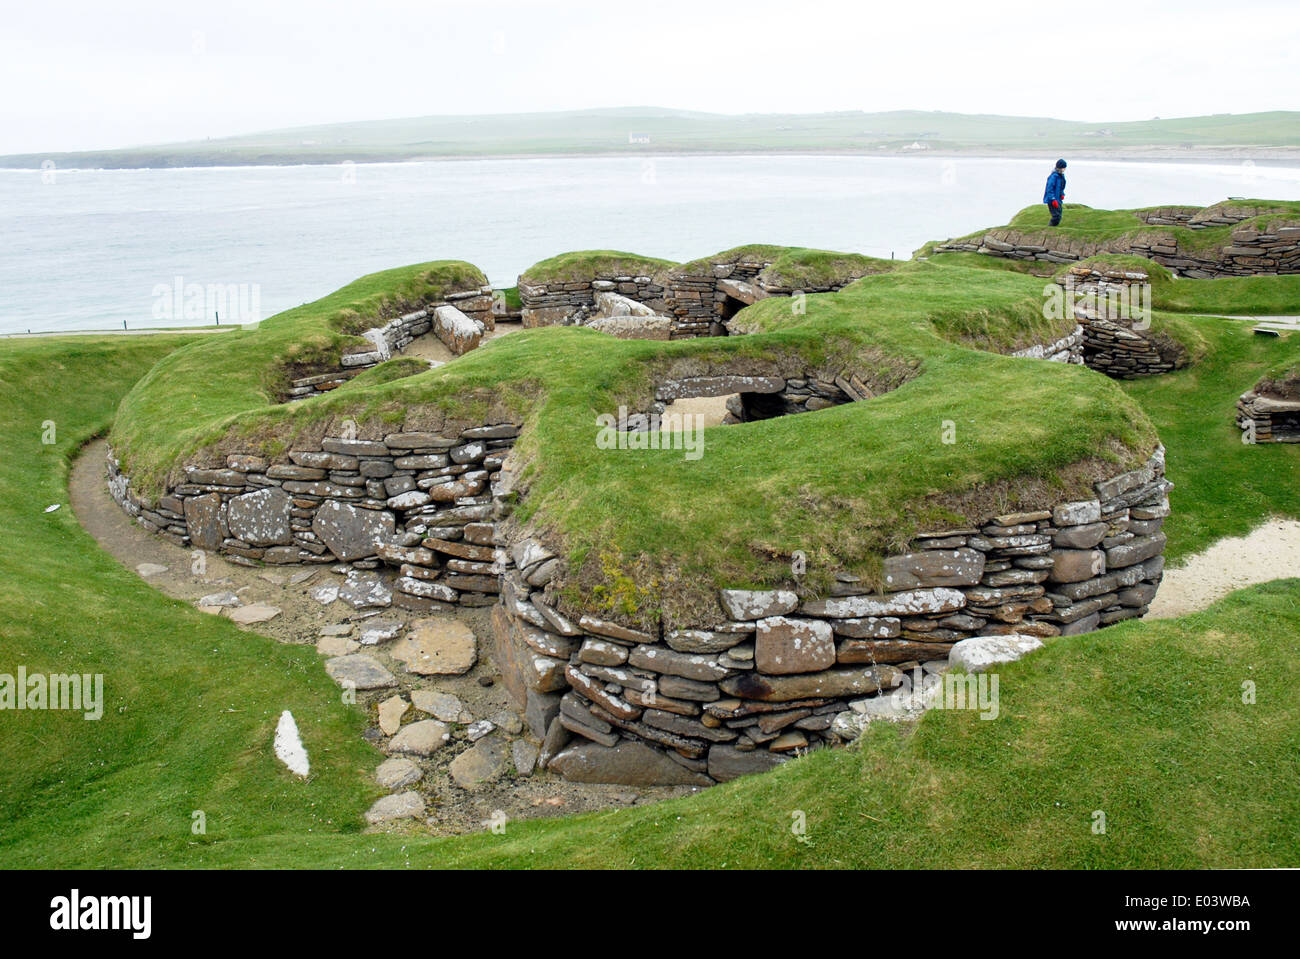 Skara Brae neolithic settlement, Bay of Skaill, Mainland, Orkney, showing the rounded shape of the huts Stock Photo